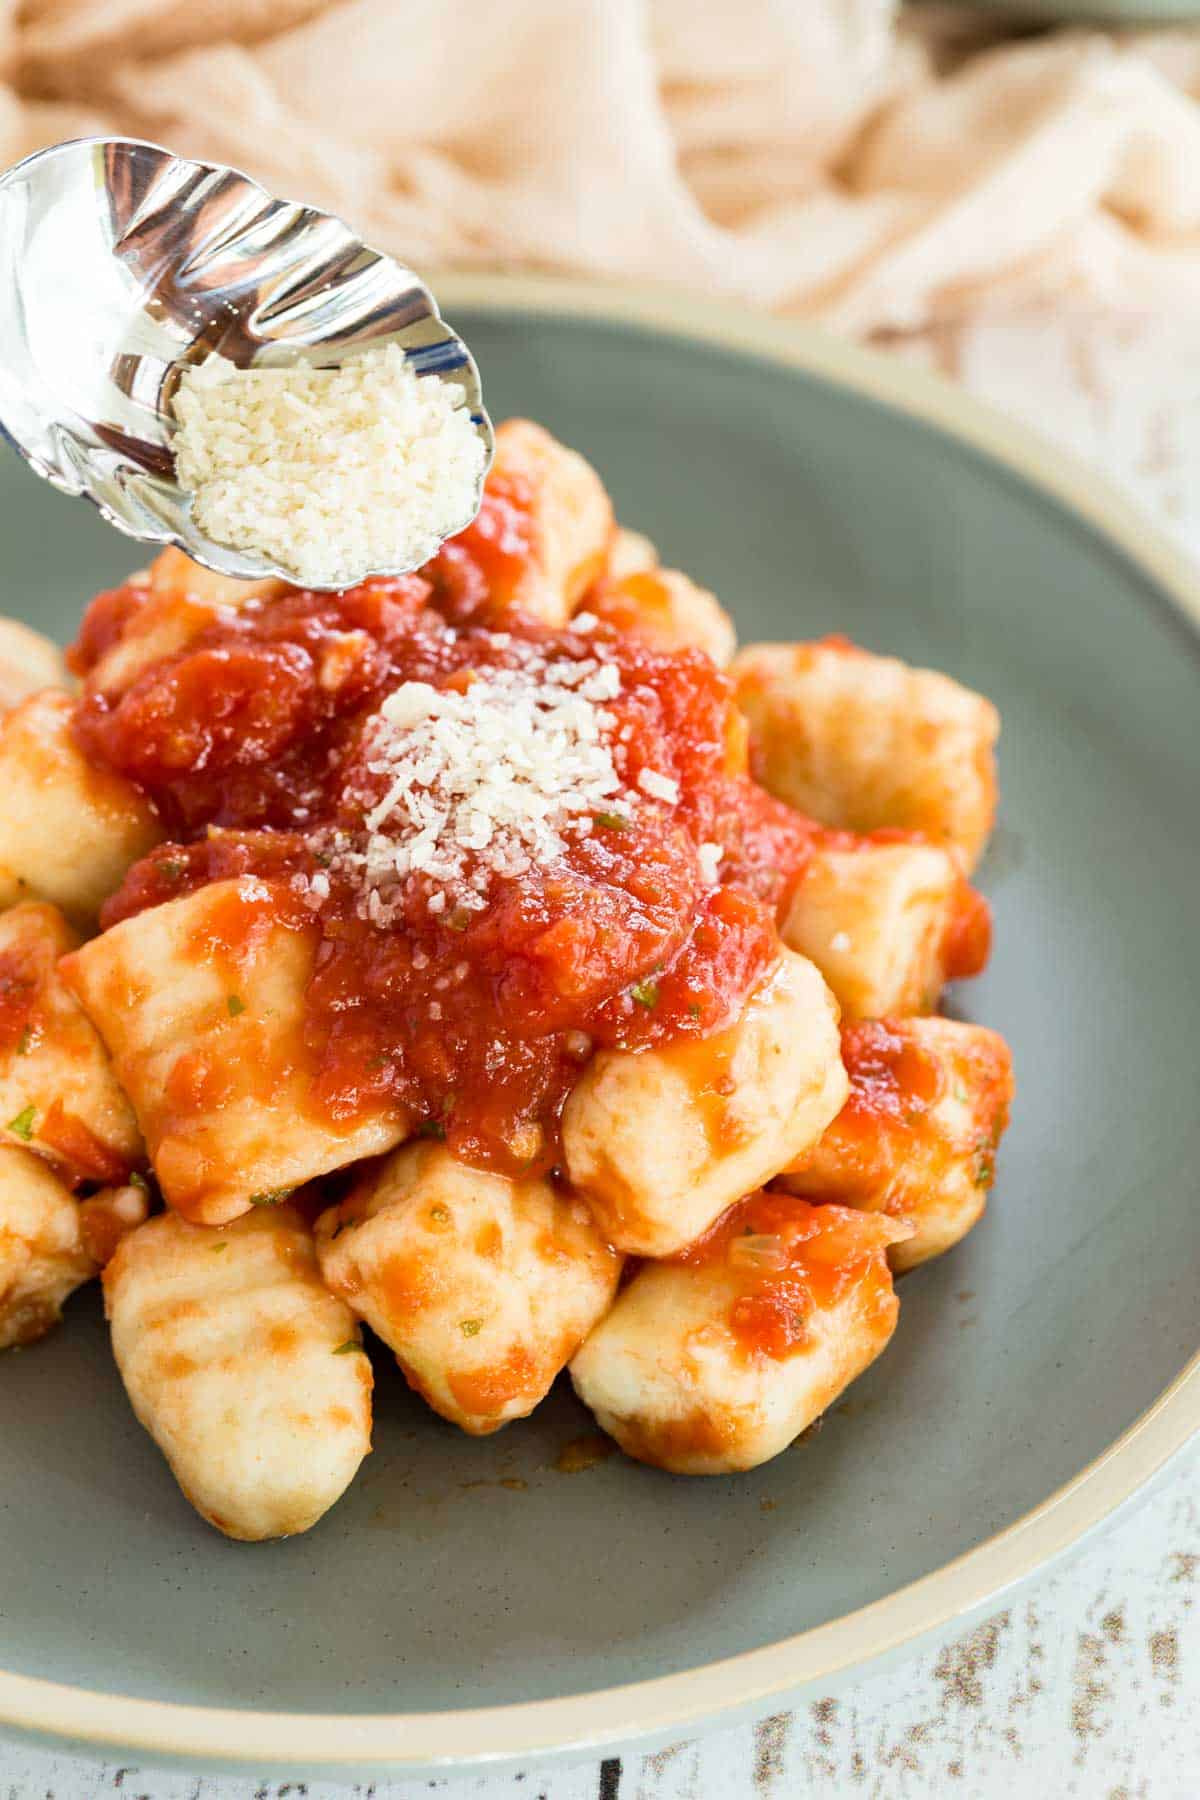 Gluten-free gnocchi and tomato sauce is sprinkled with a spoonful of parmesan cheese.